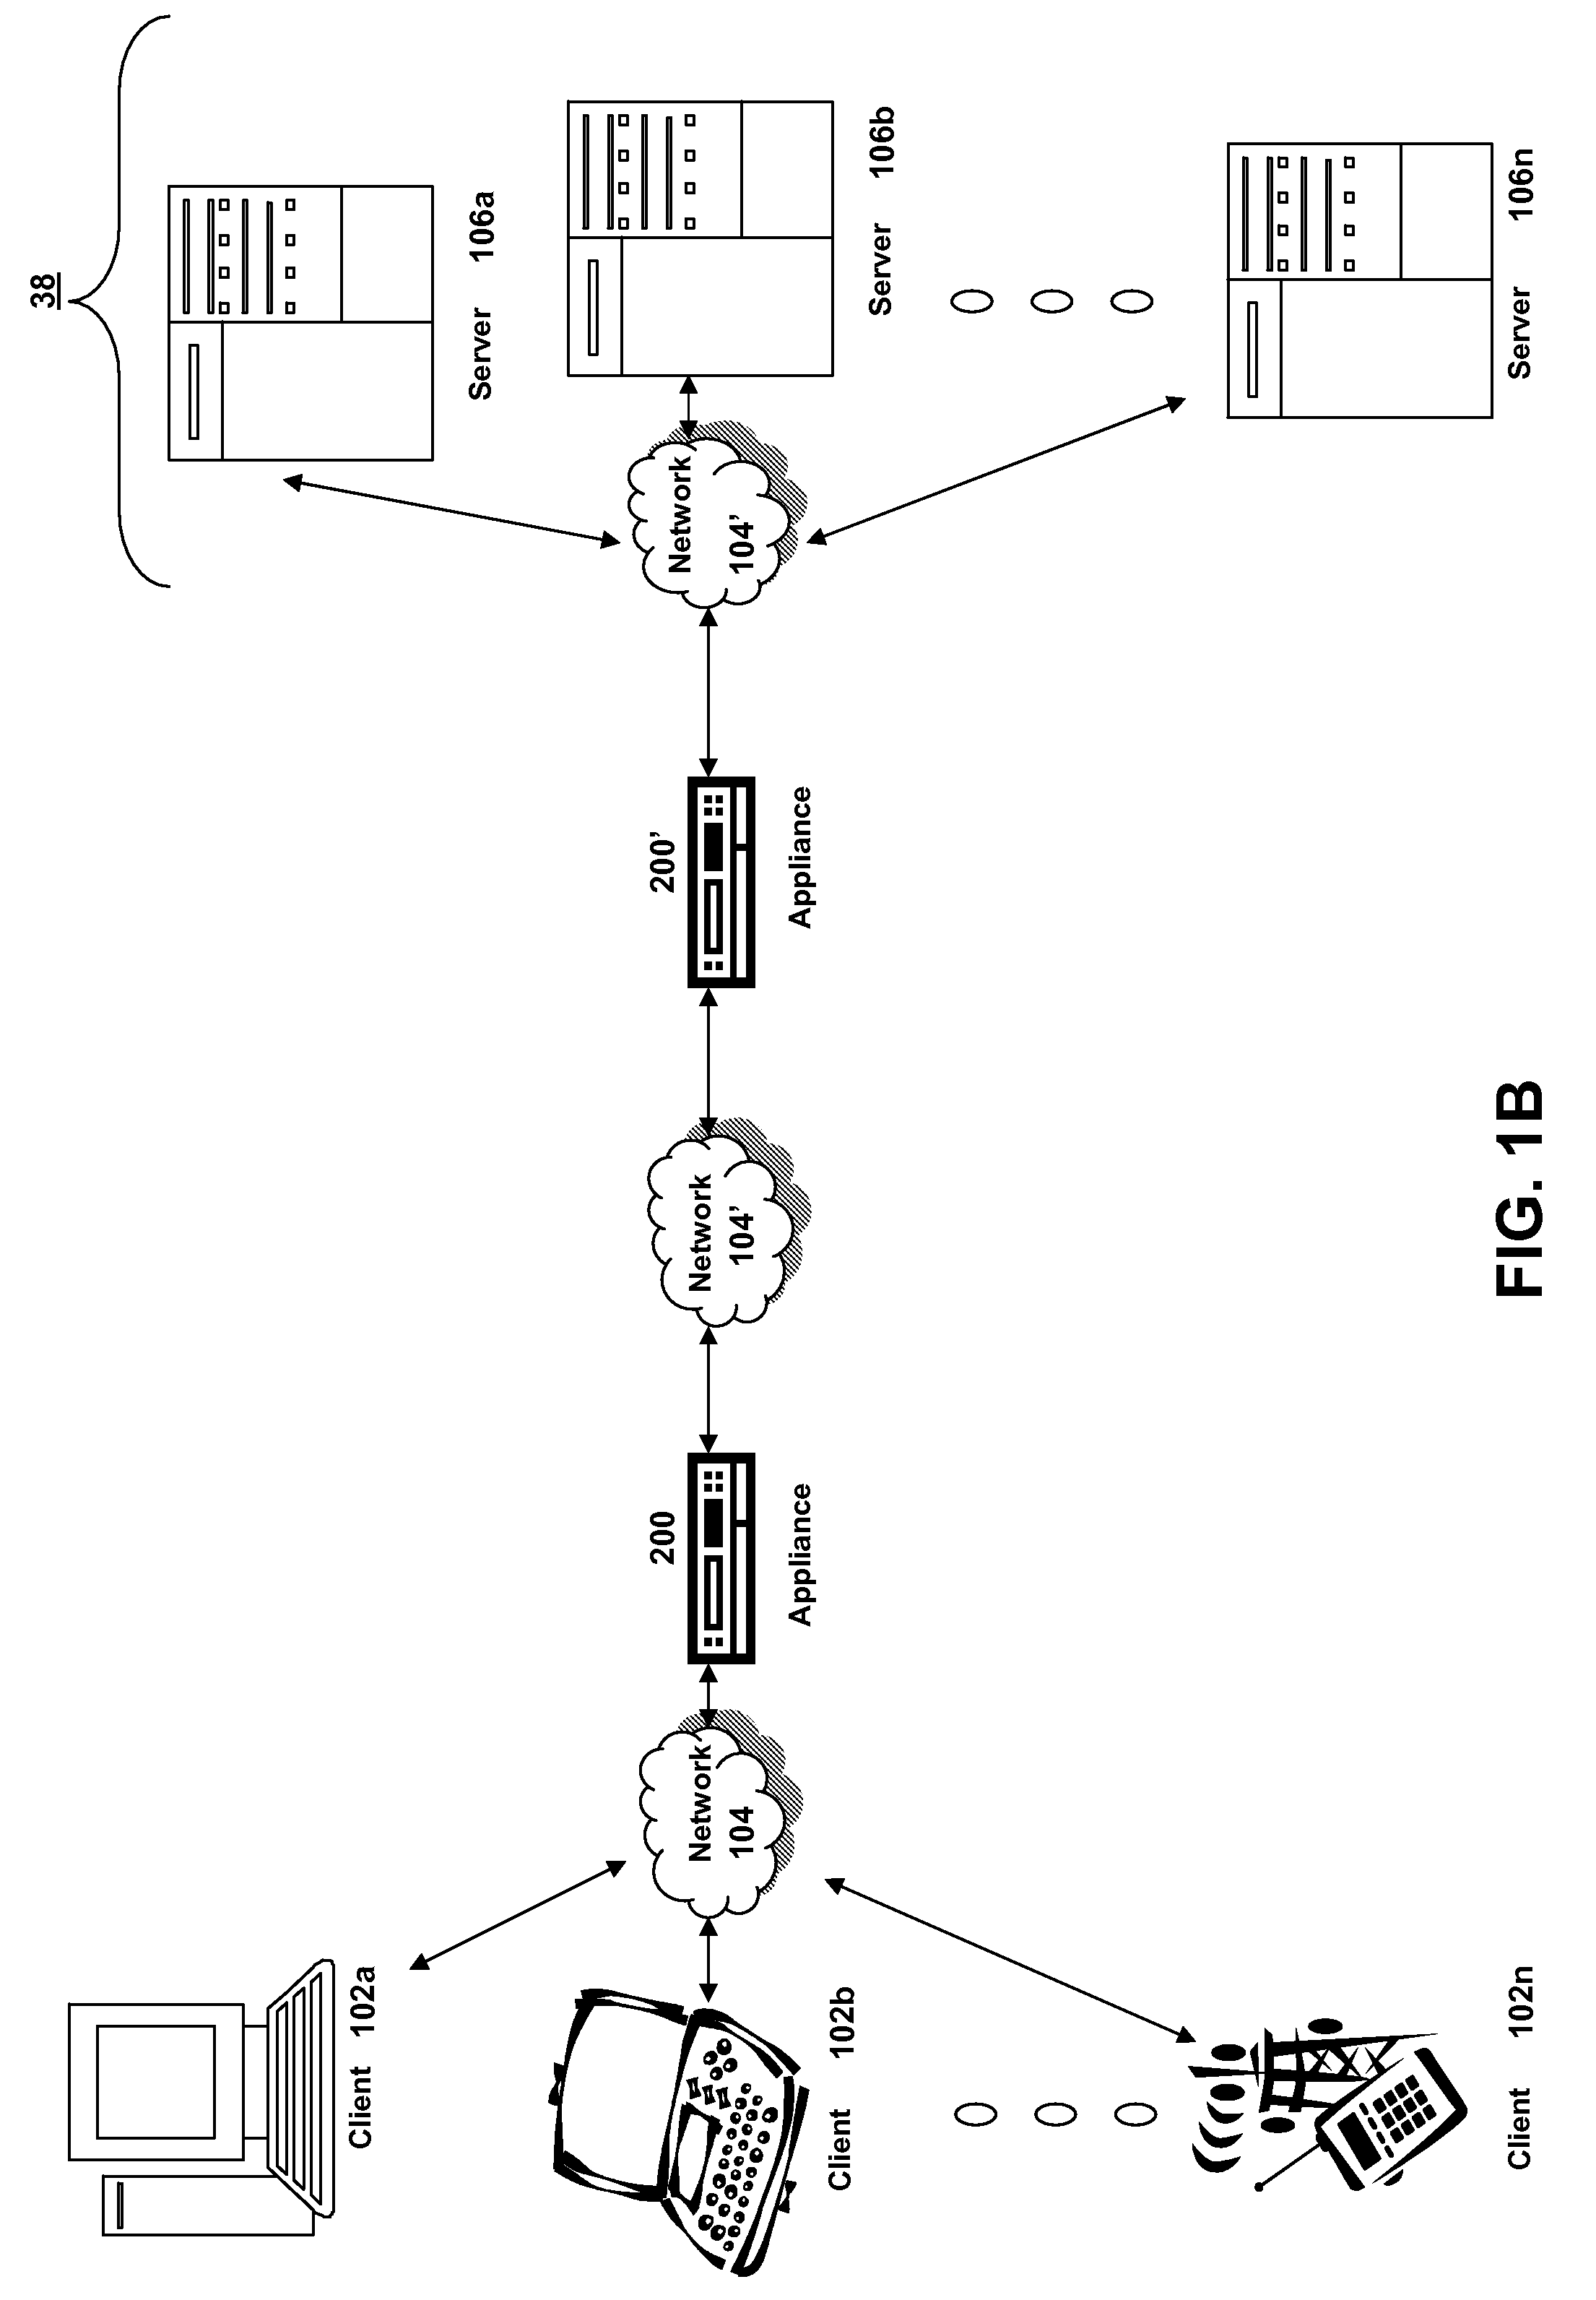 Systems and Methods for GSLB Remote Service Monitoring